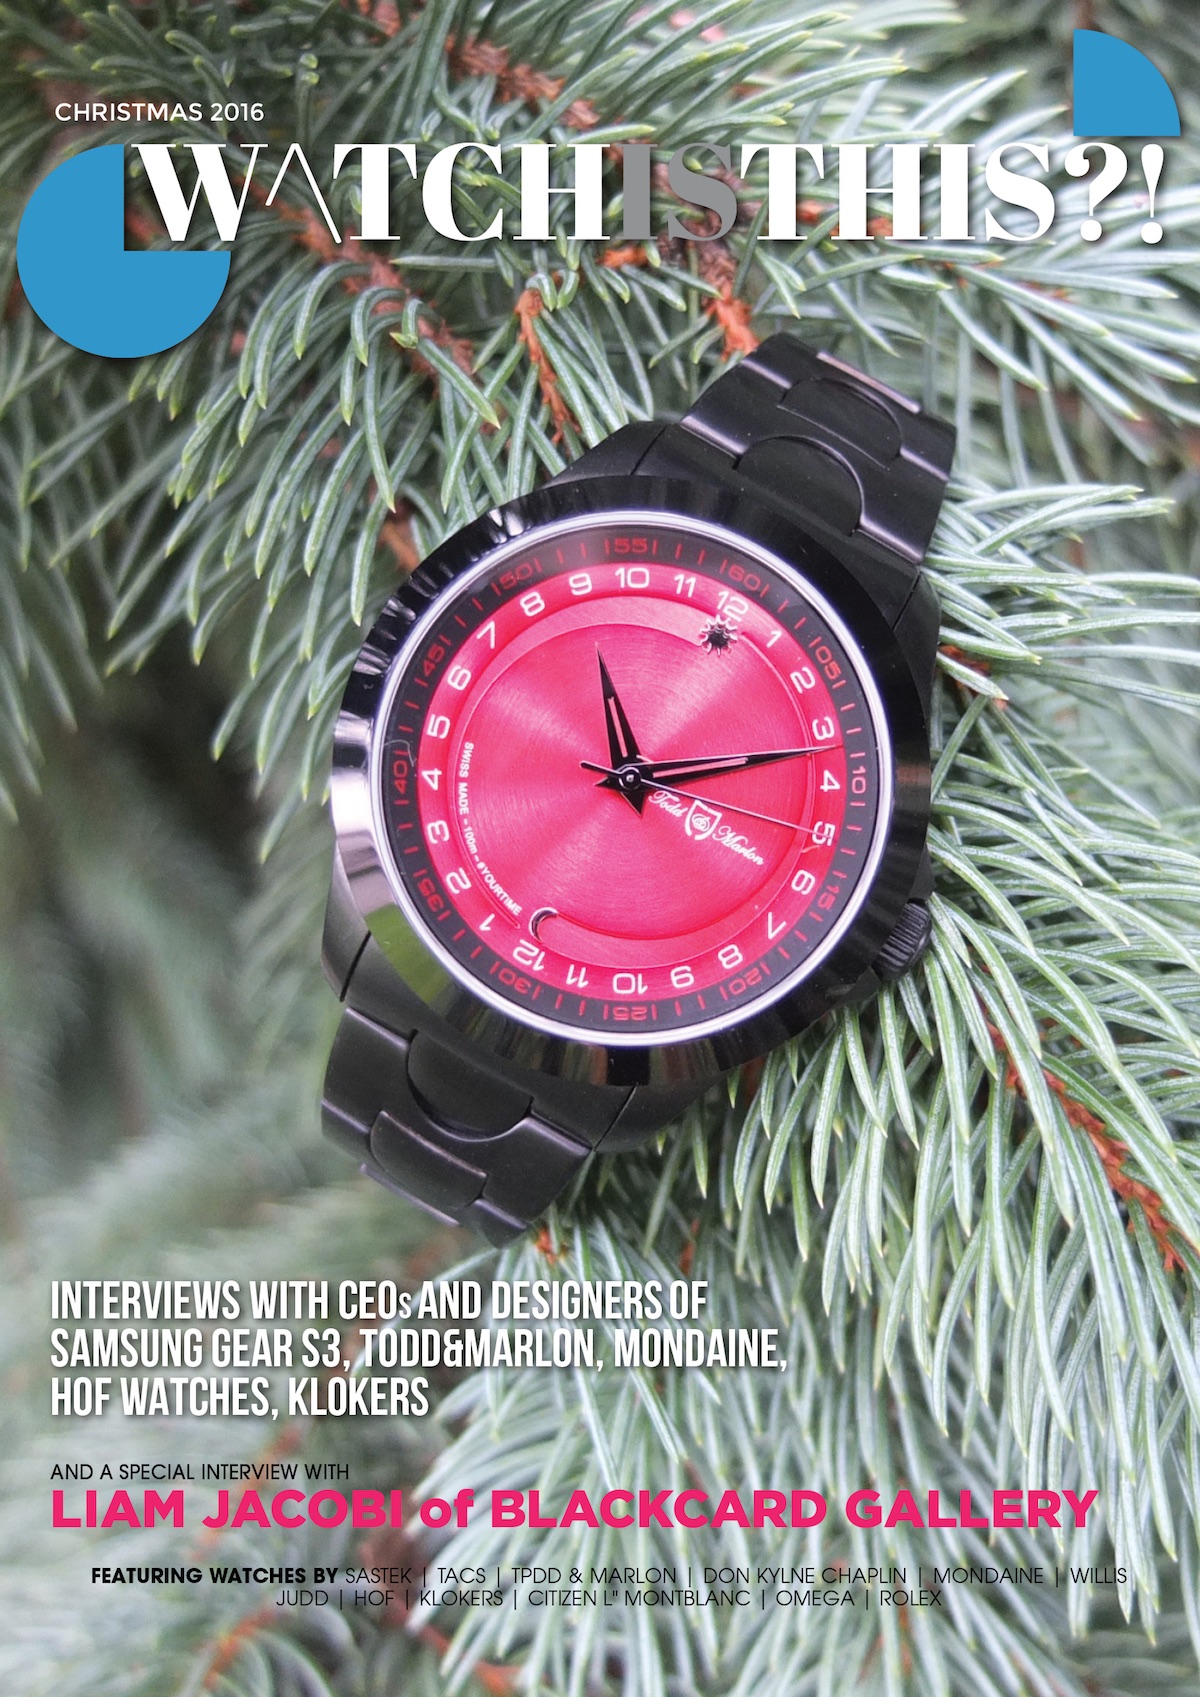 Watchisthis?! Christmas Issue Out Now!